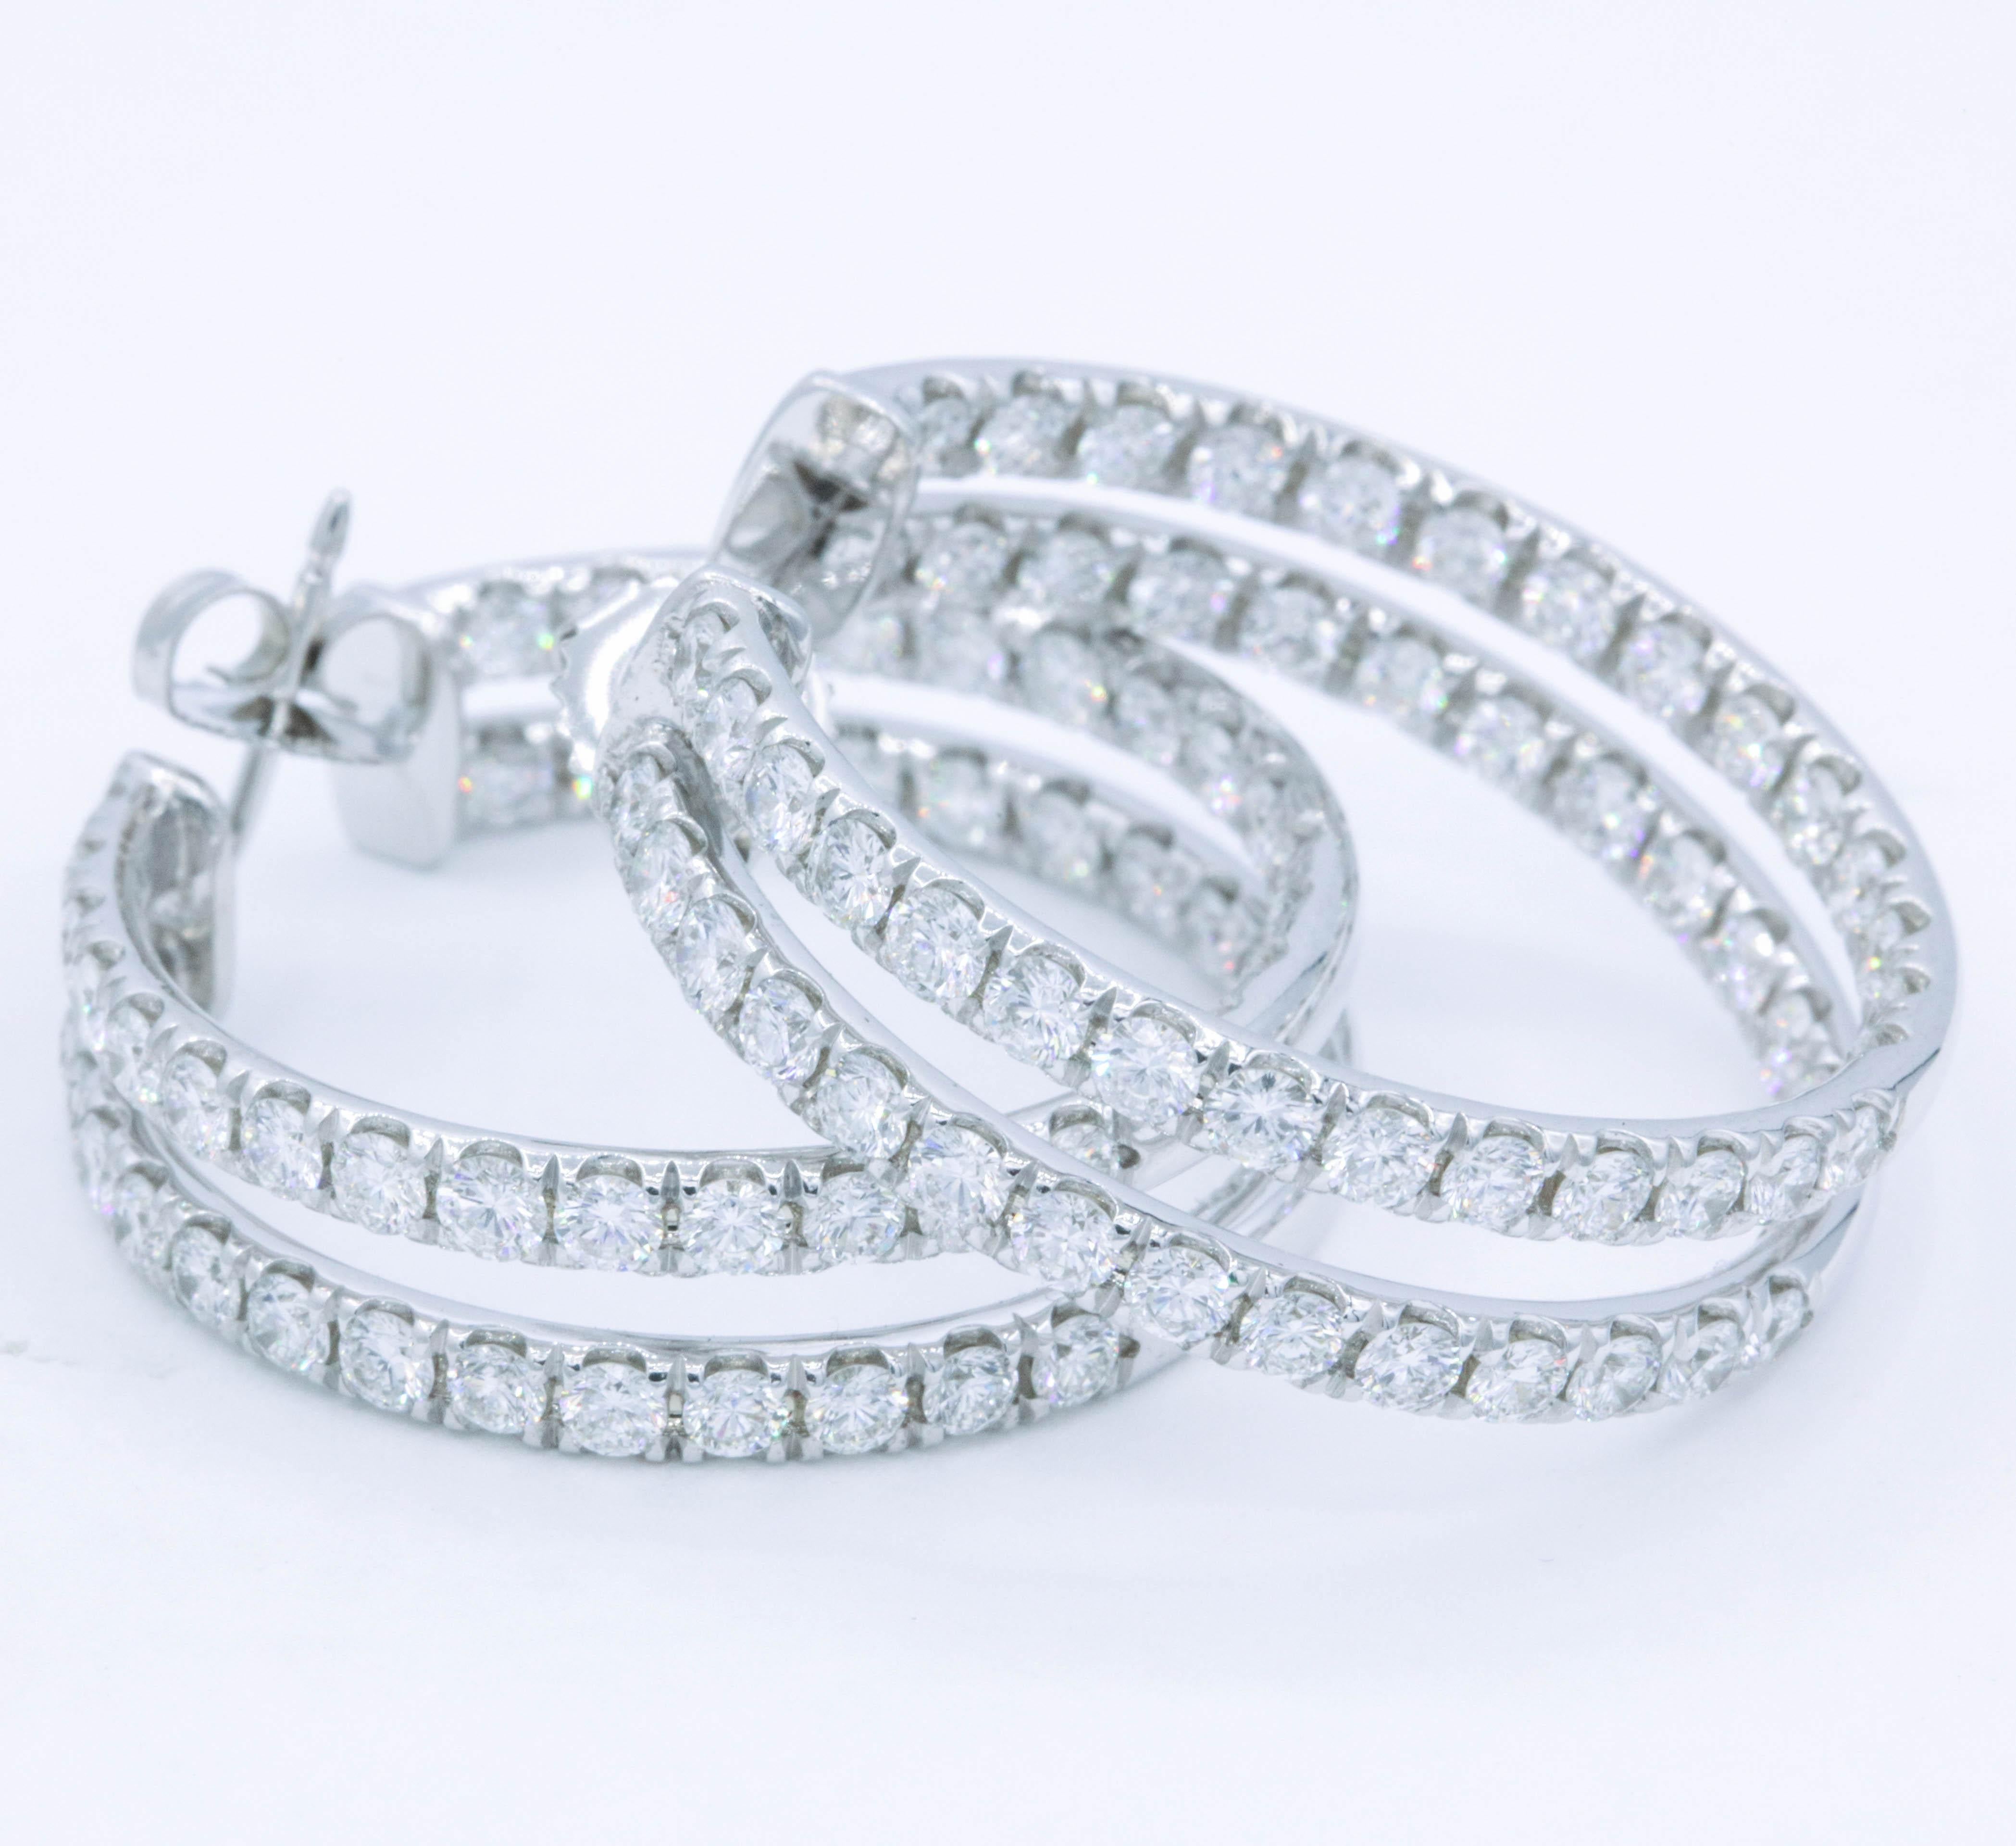 Double row hoop earrings containing 112 round brilliants, weighing 5.60 carats, in 14k white gold. 
Color: G-H
Clarity: SI